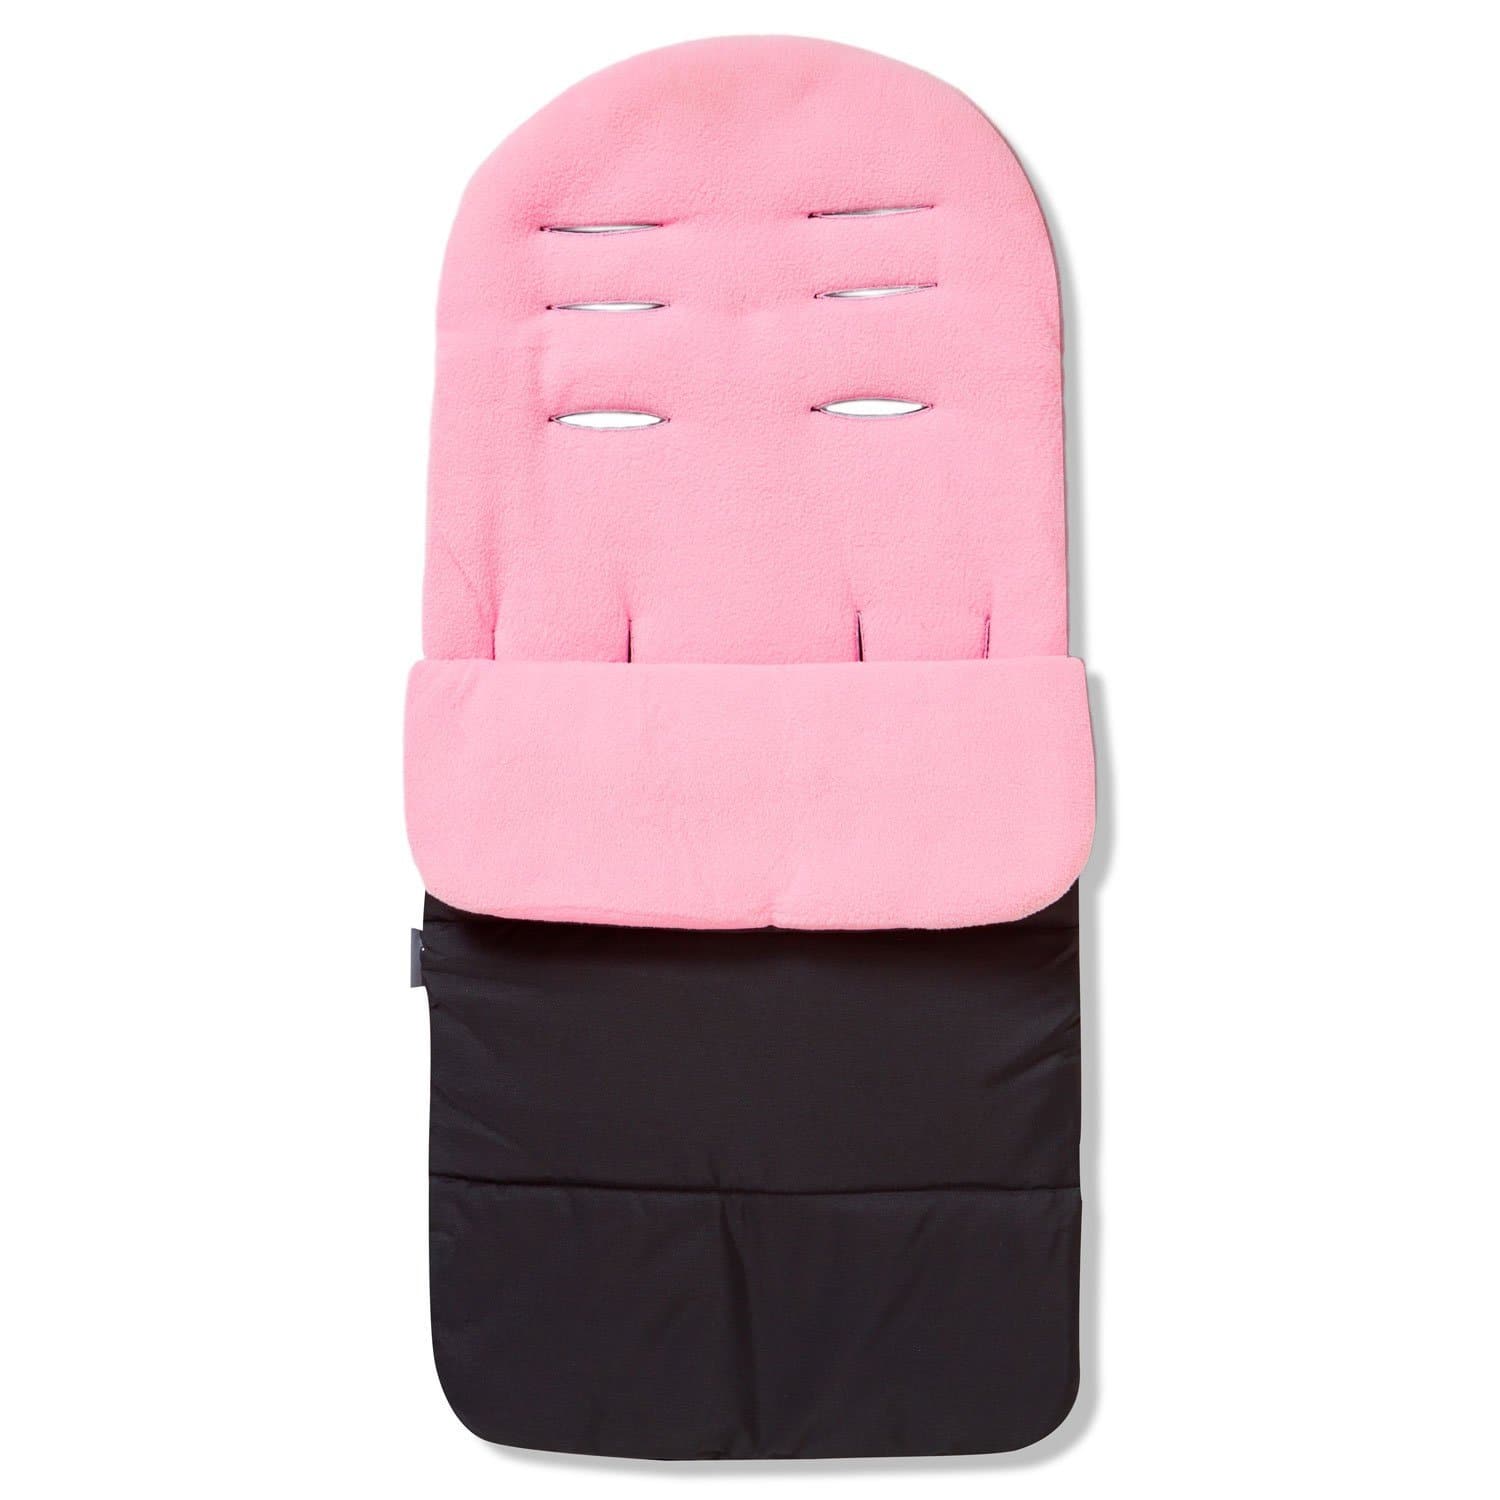 Premium Footmuff / Cosy Toes Compatible with Egg - For Your Little One